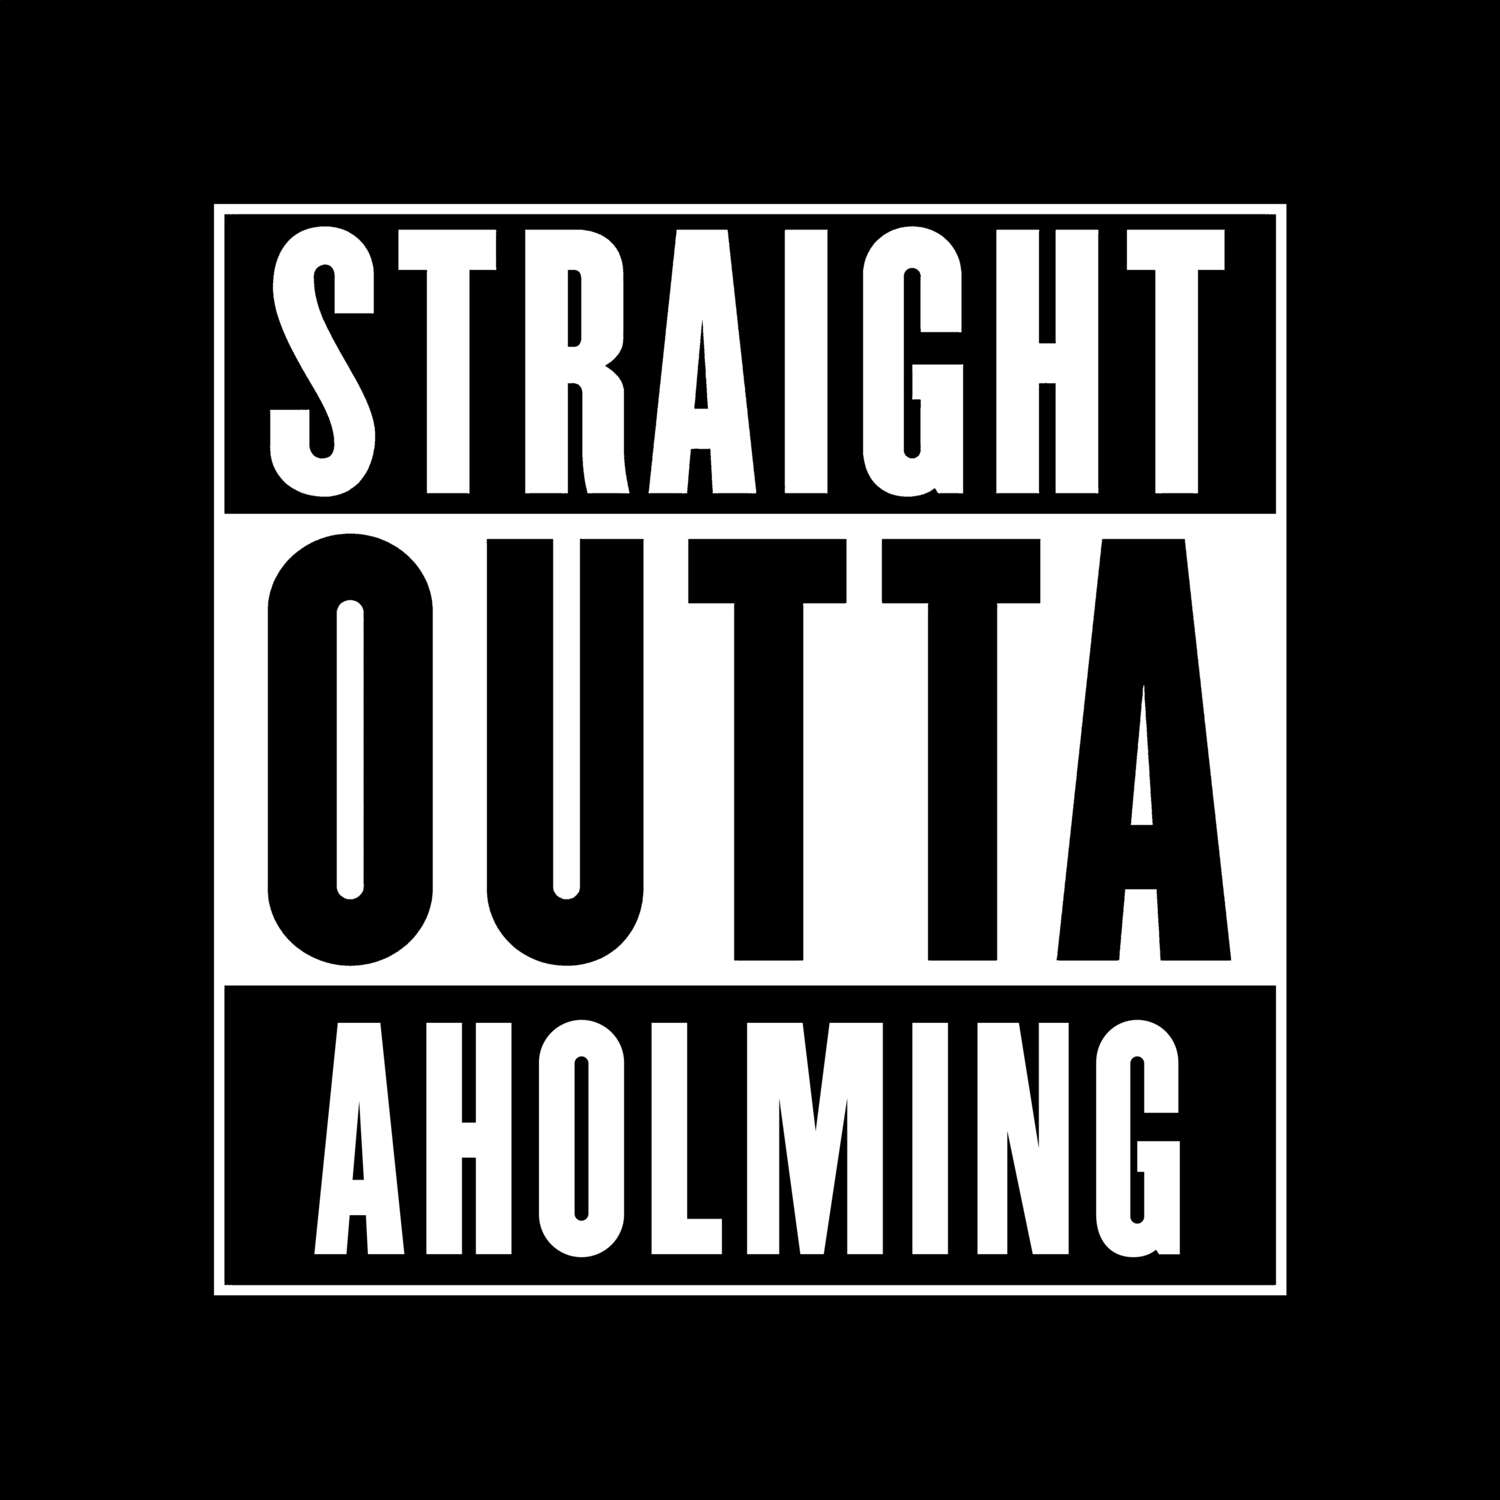 Aholming T-Shirt »Straight Outta«